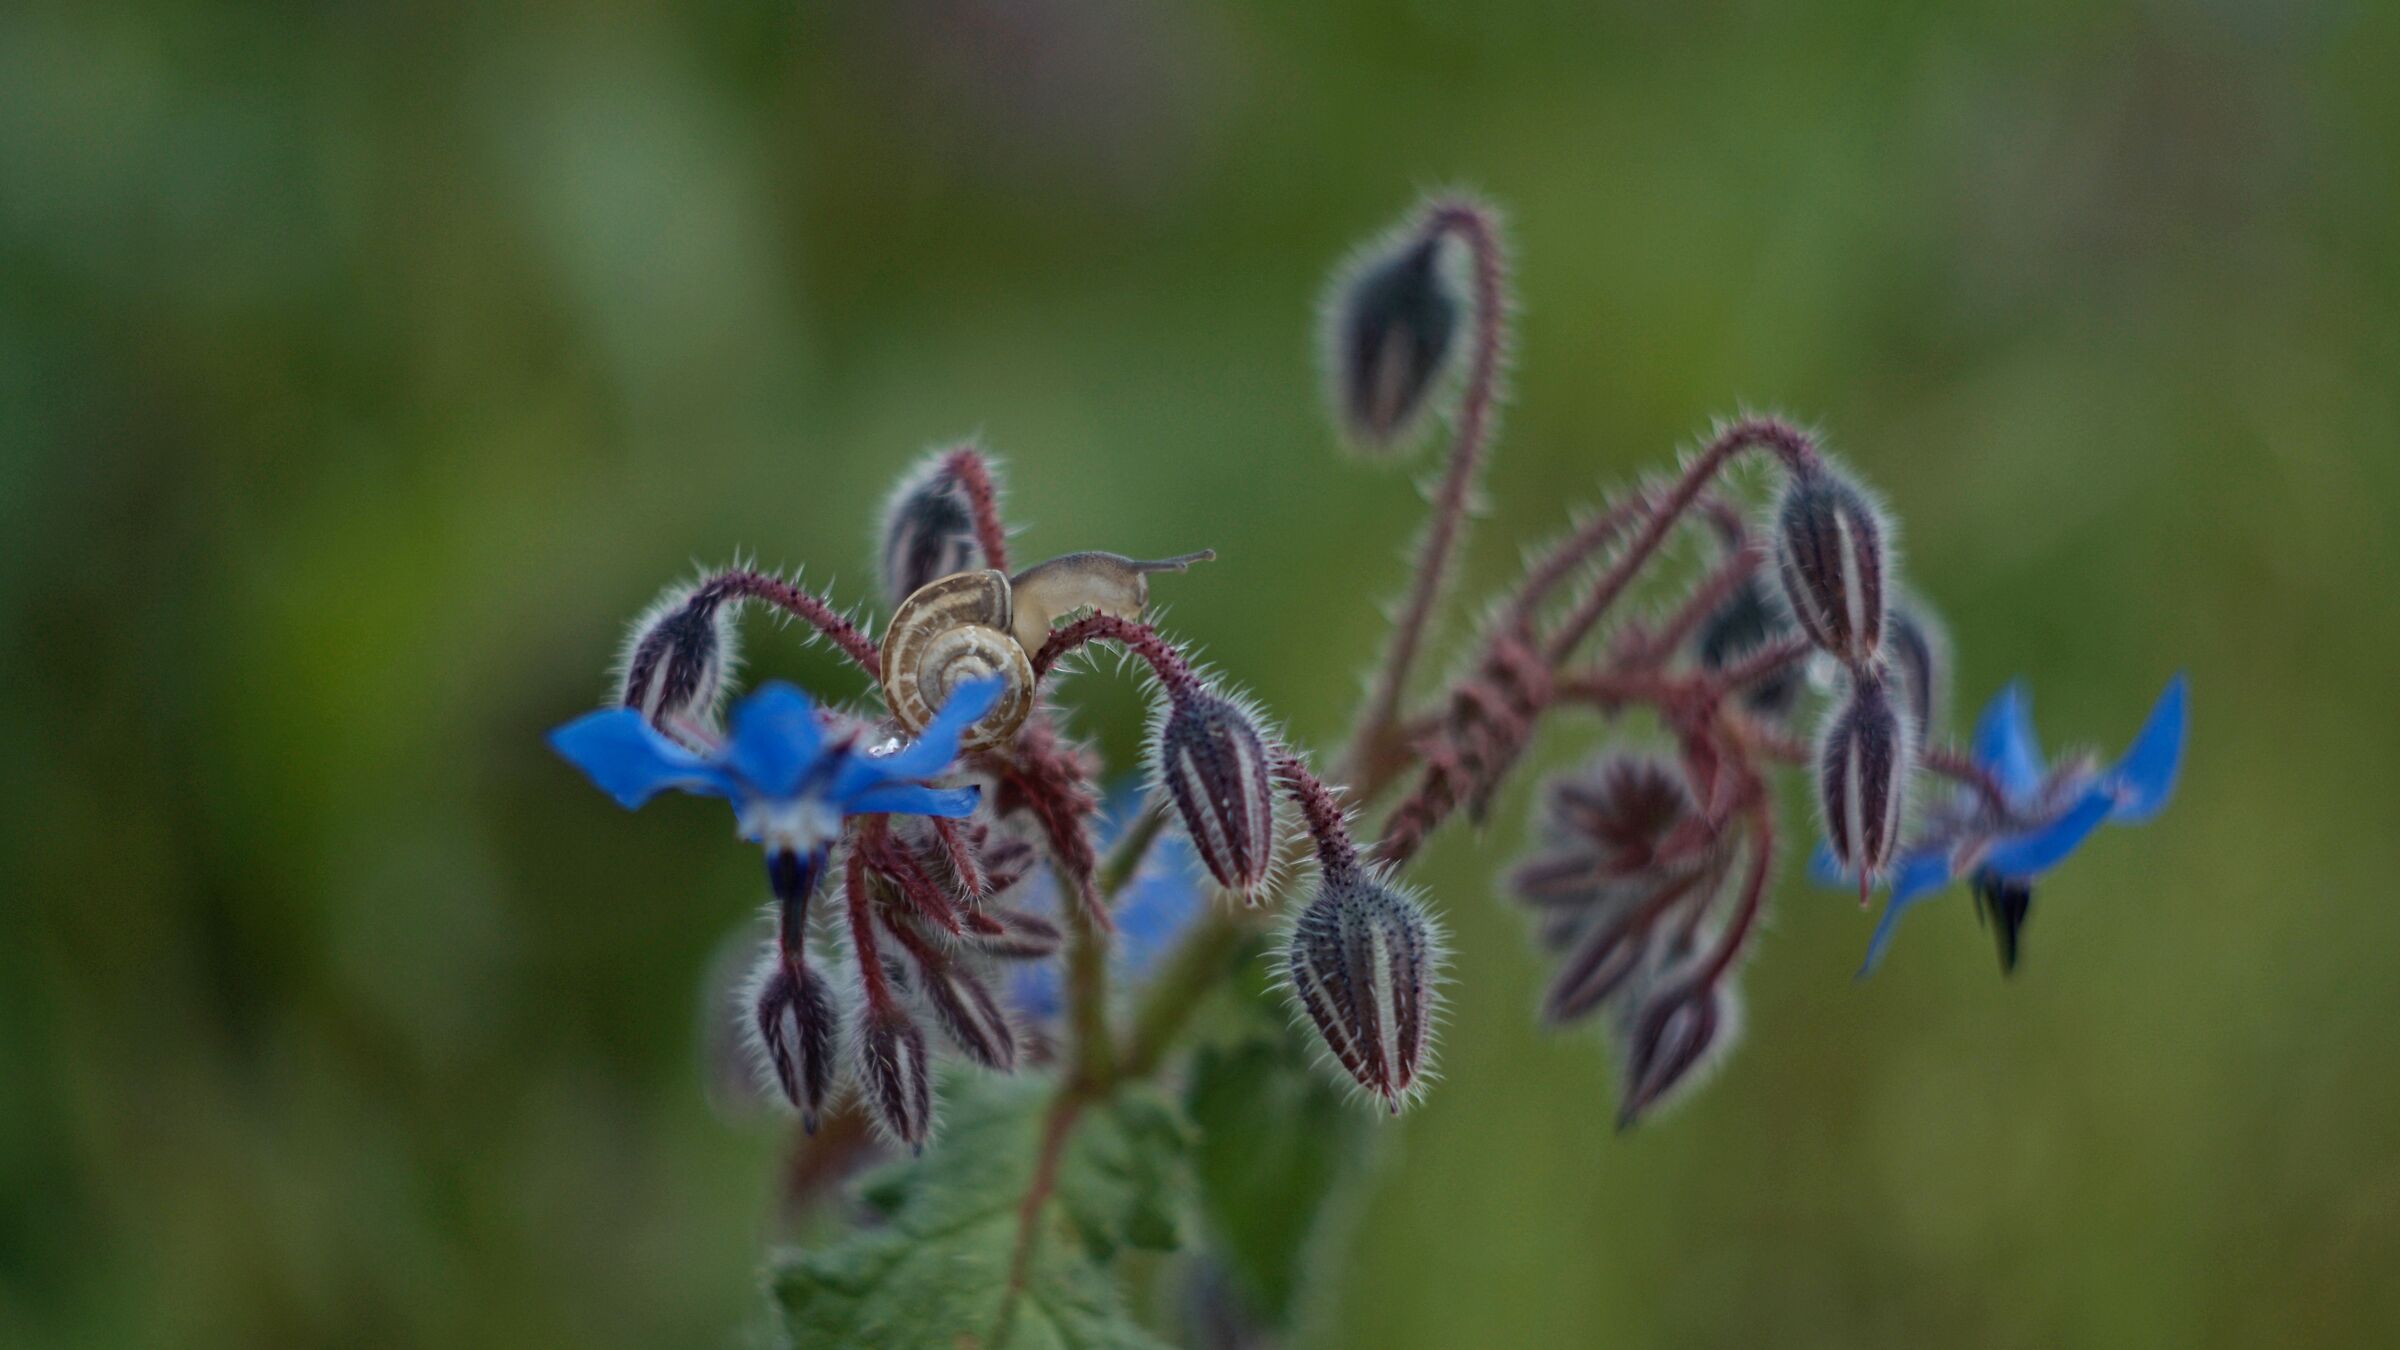 Borage and Snail...